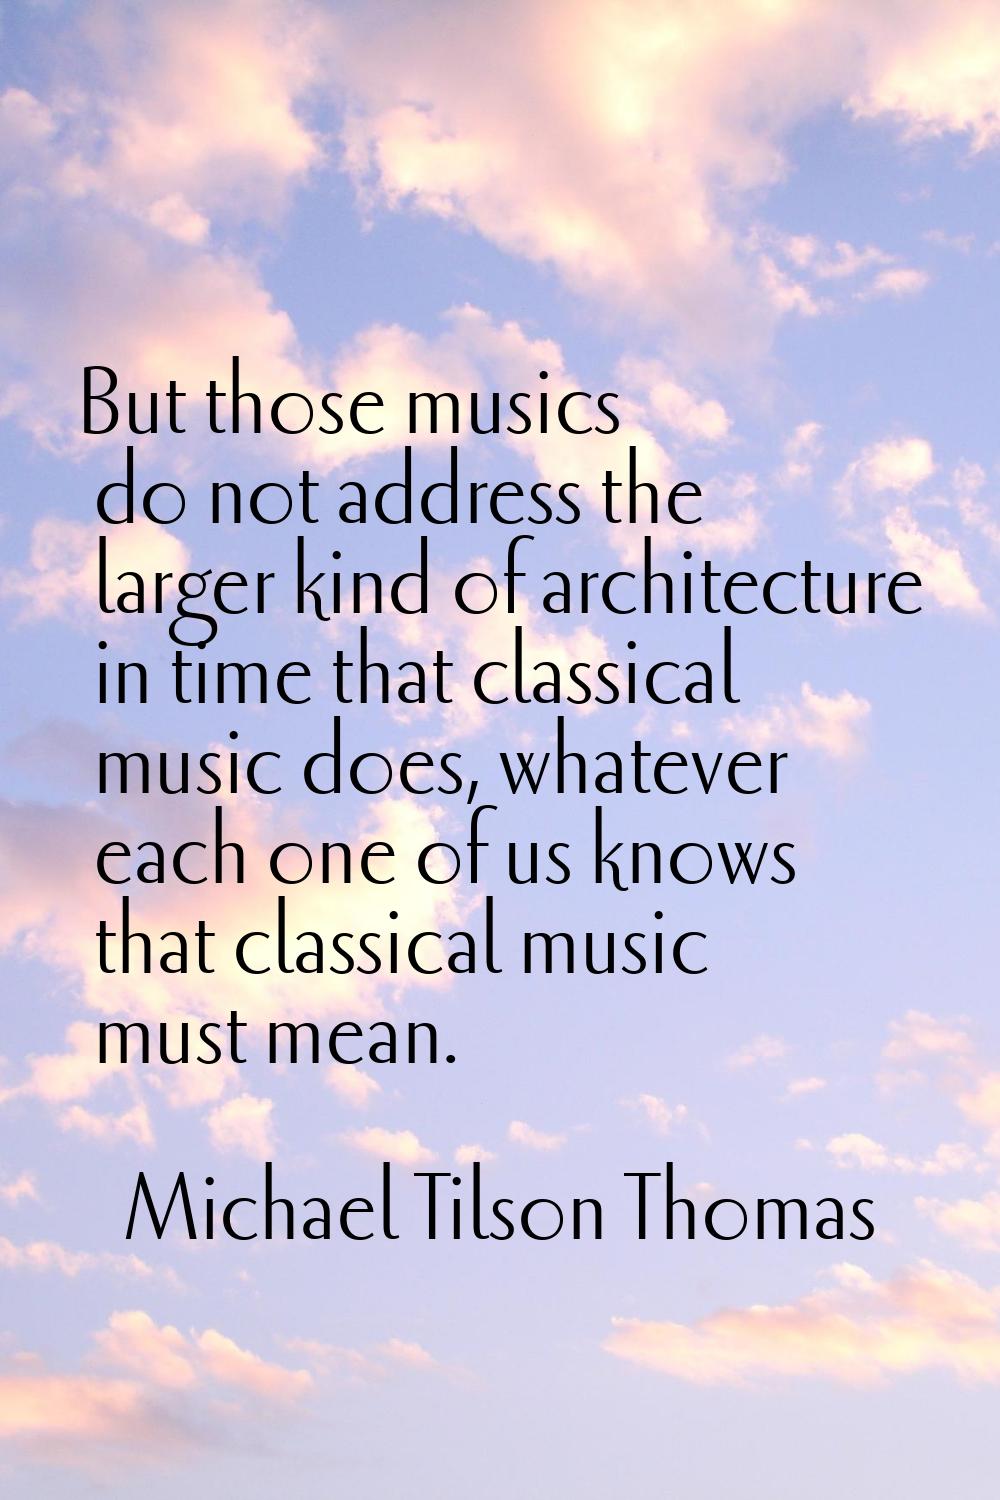 But those musics do not address the larger kind of architecture in time that classical music does, 